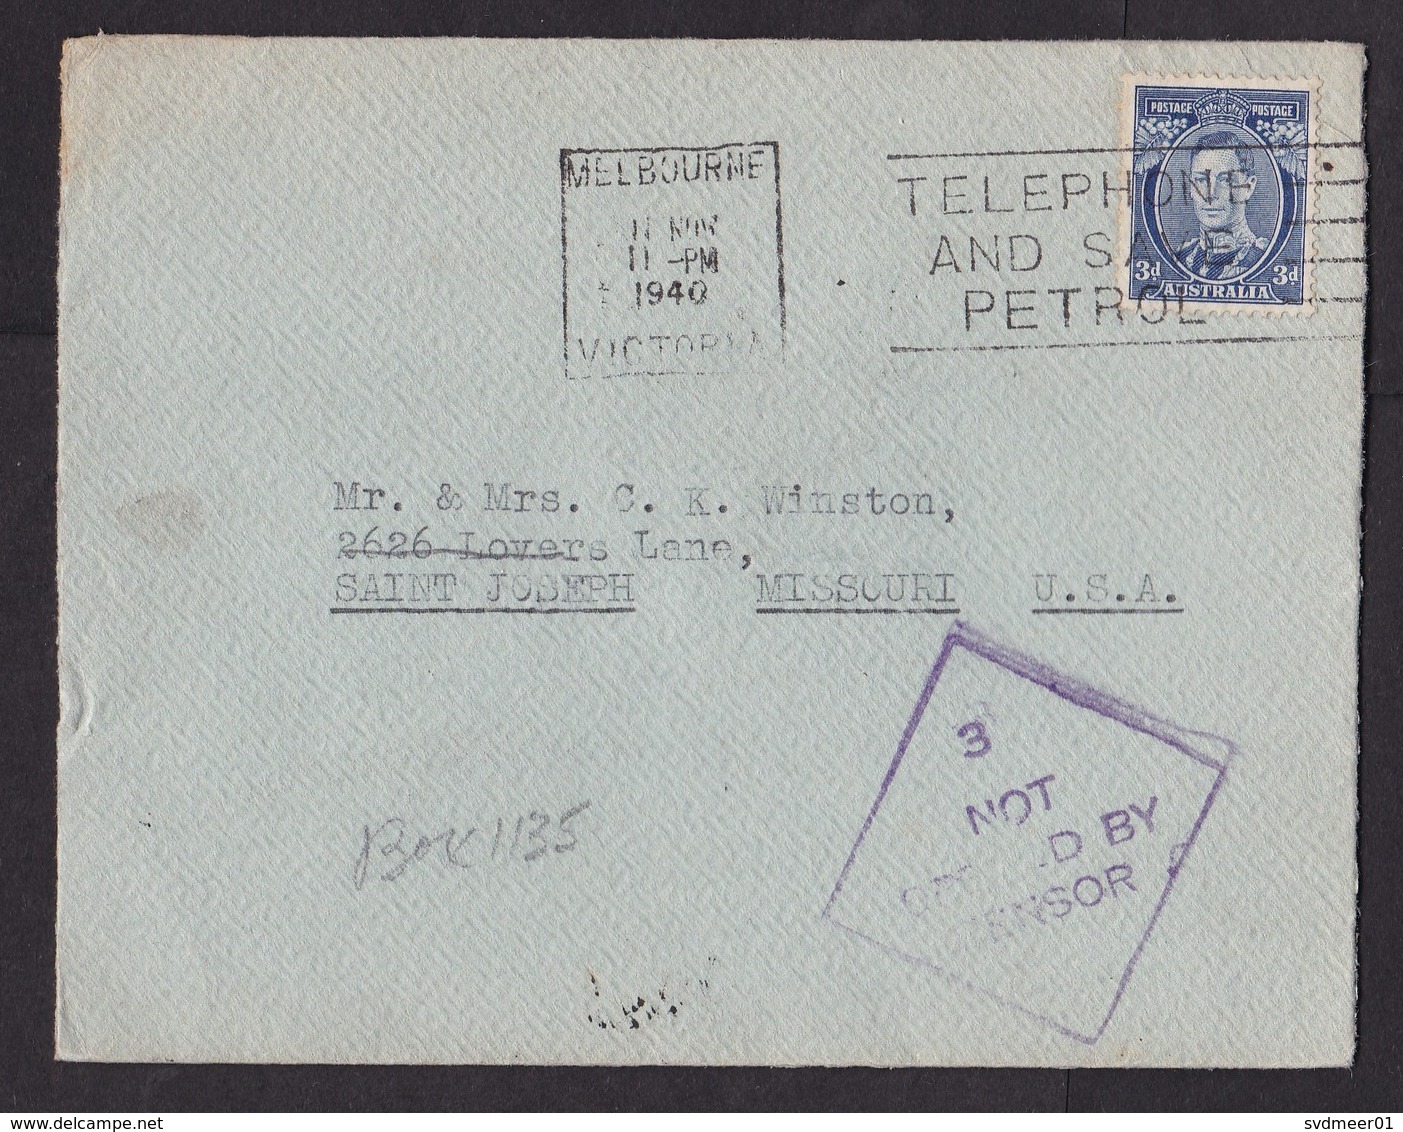 Australia: Cover To USA, 1940, 1 Stamp, Cancel Telephone And Save Petrol, Not Opened By Censor, WW2 (roughly Opened) - Briefe U. Dokumente